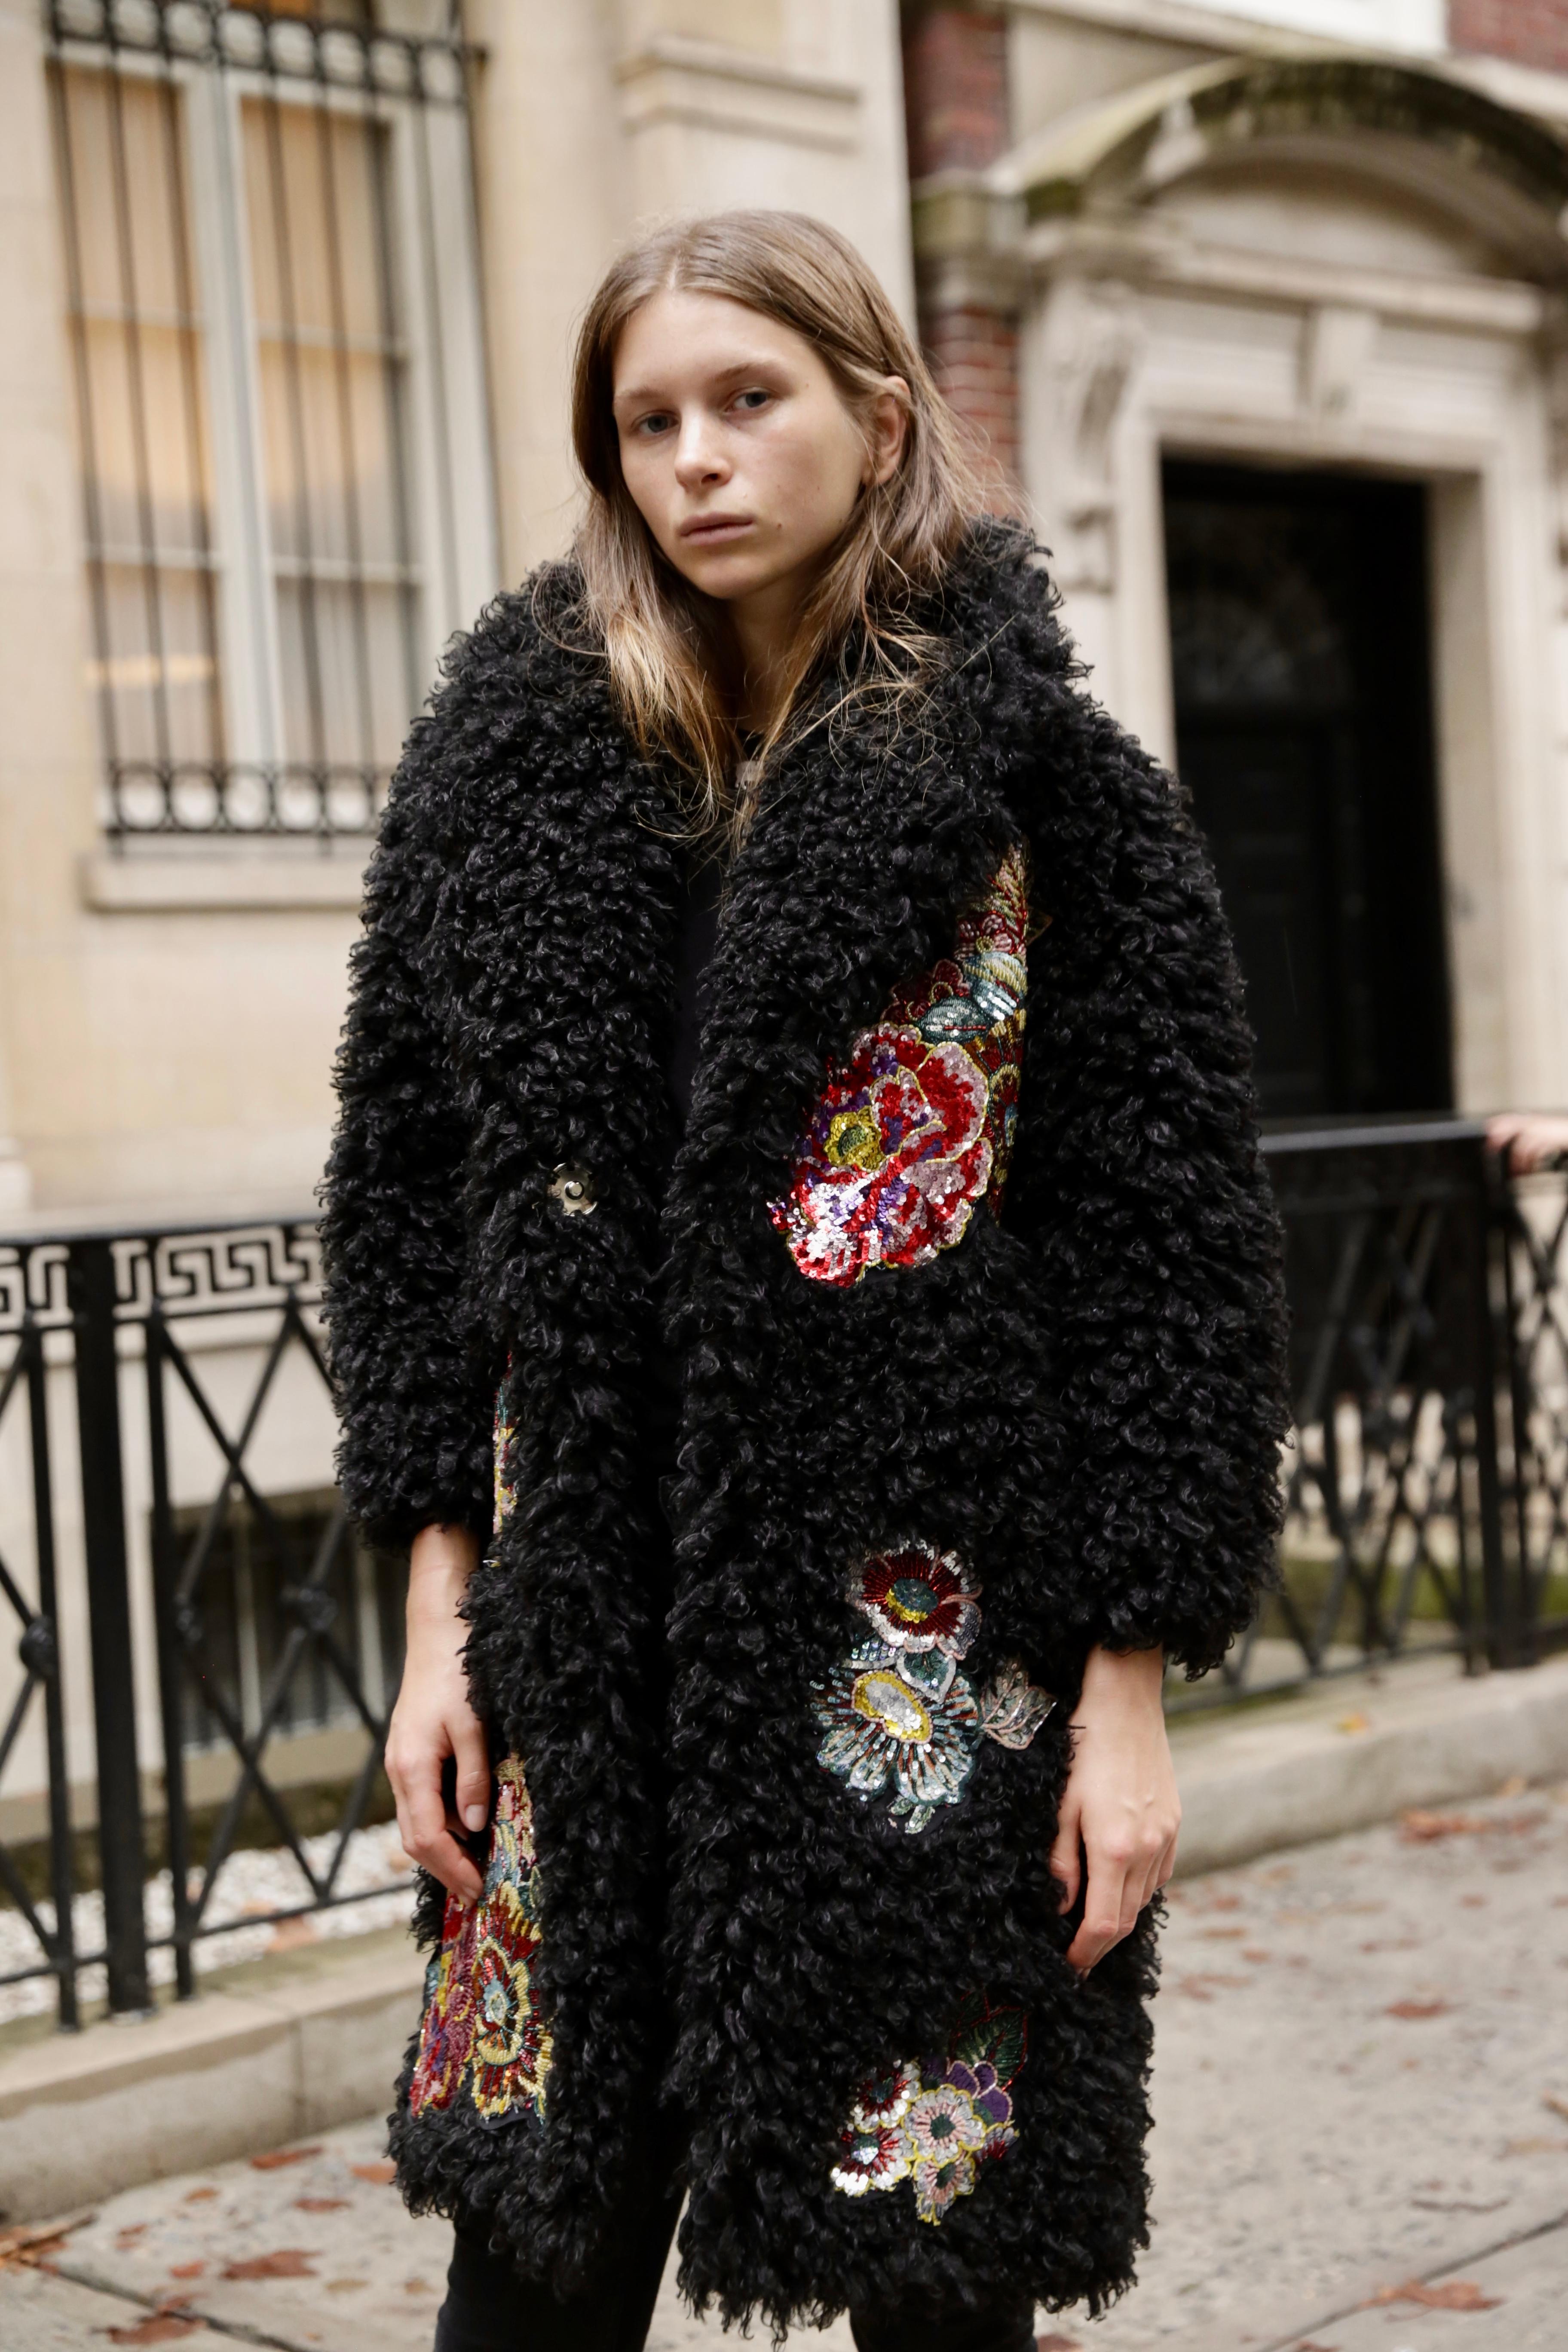 The Anna Pelush black boucle' faux fur coat with embroidered patches is a one of a kind exclusive piece. Featuring the highest quality man made pelage, the large poodle curls are custom made for Pelush. Featuring recycled frayed patches applique's